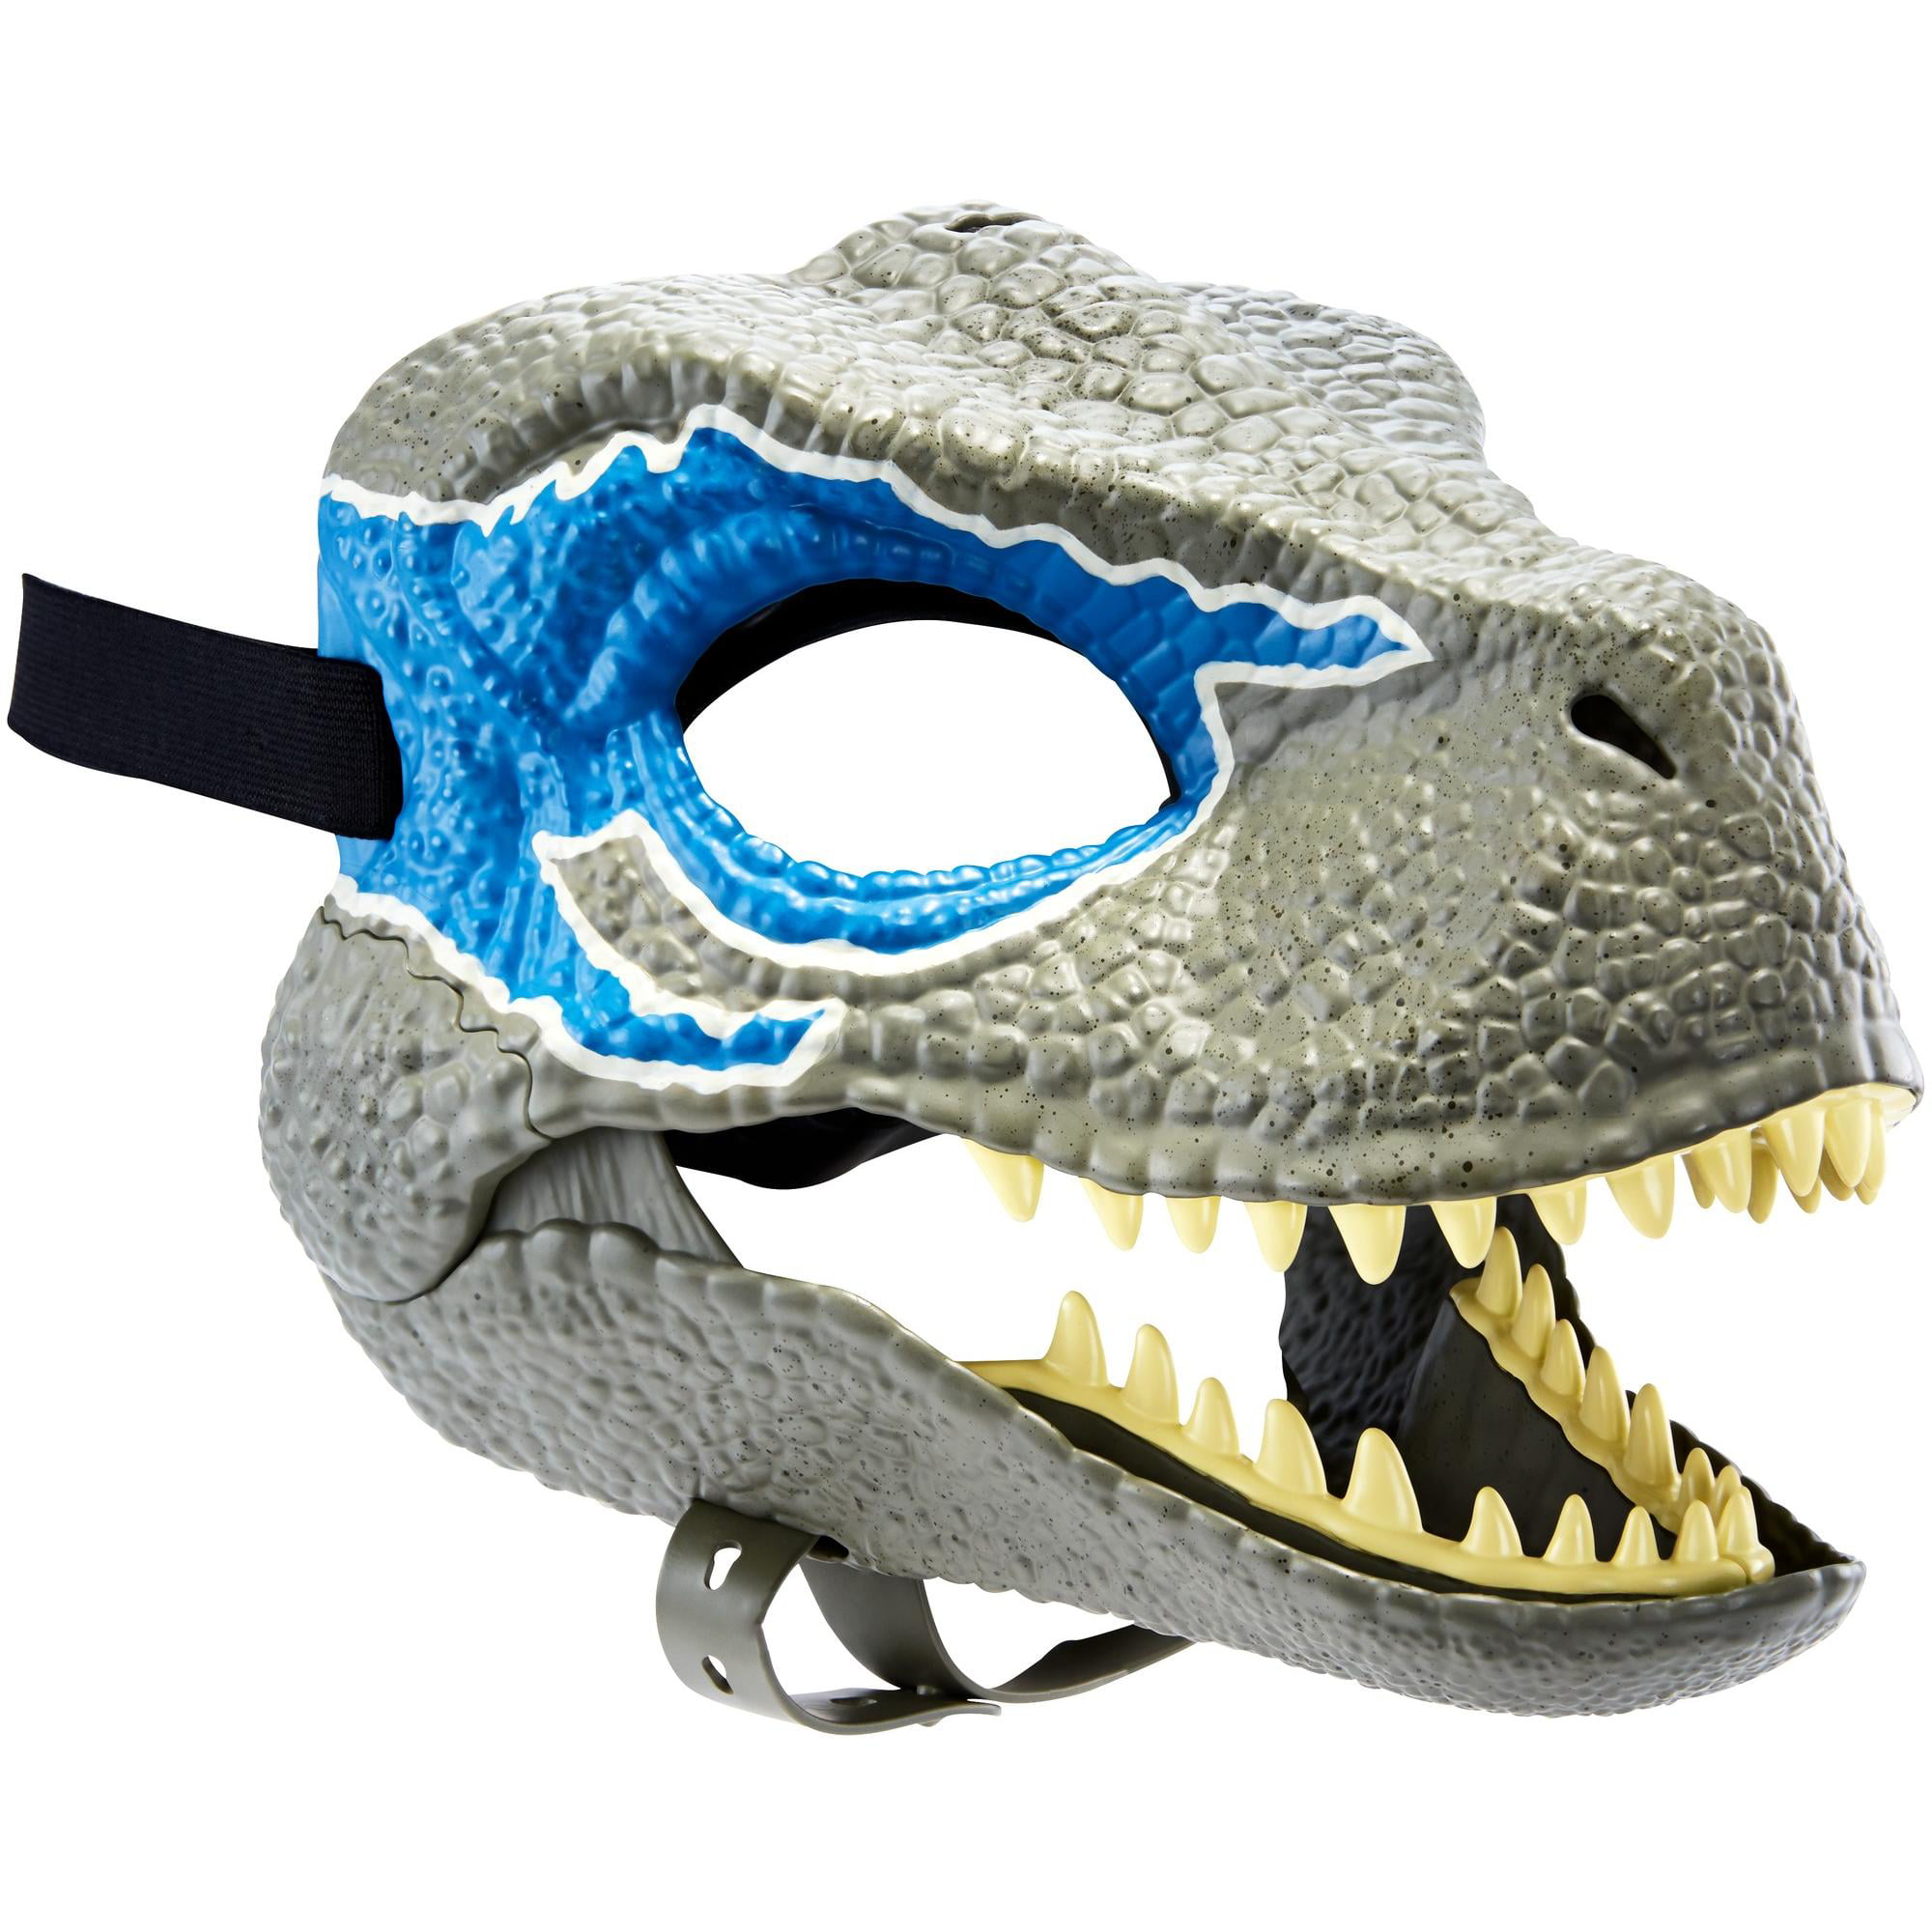 Jurassic World Dinosaur Mask With Opening Jaw, Texture And Color